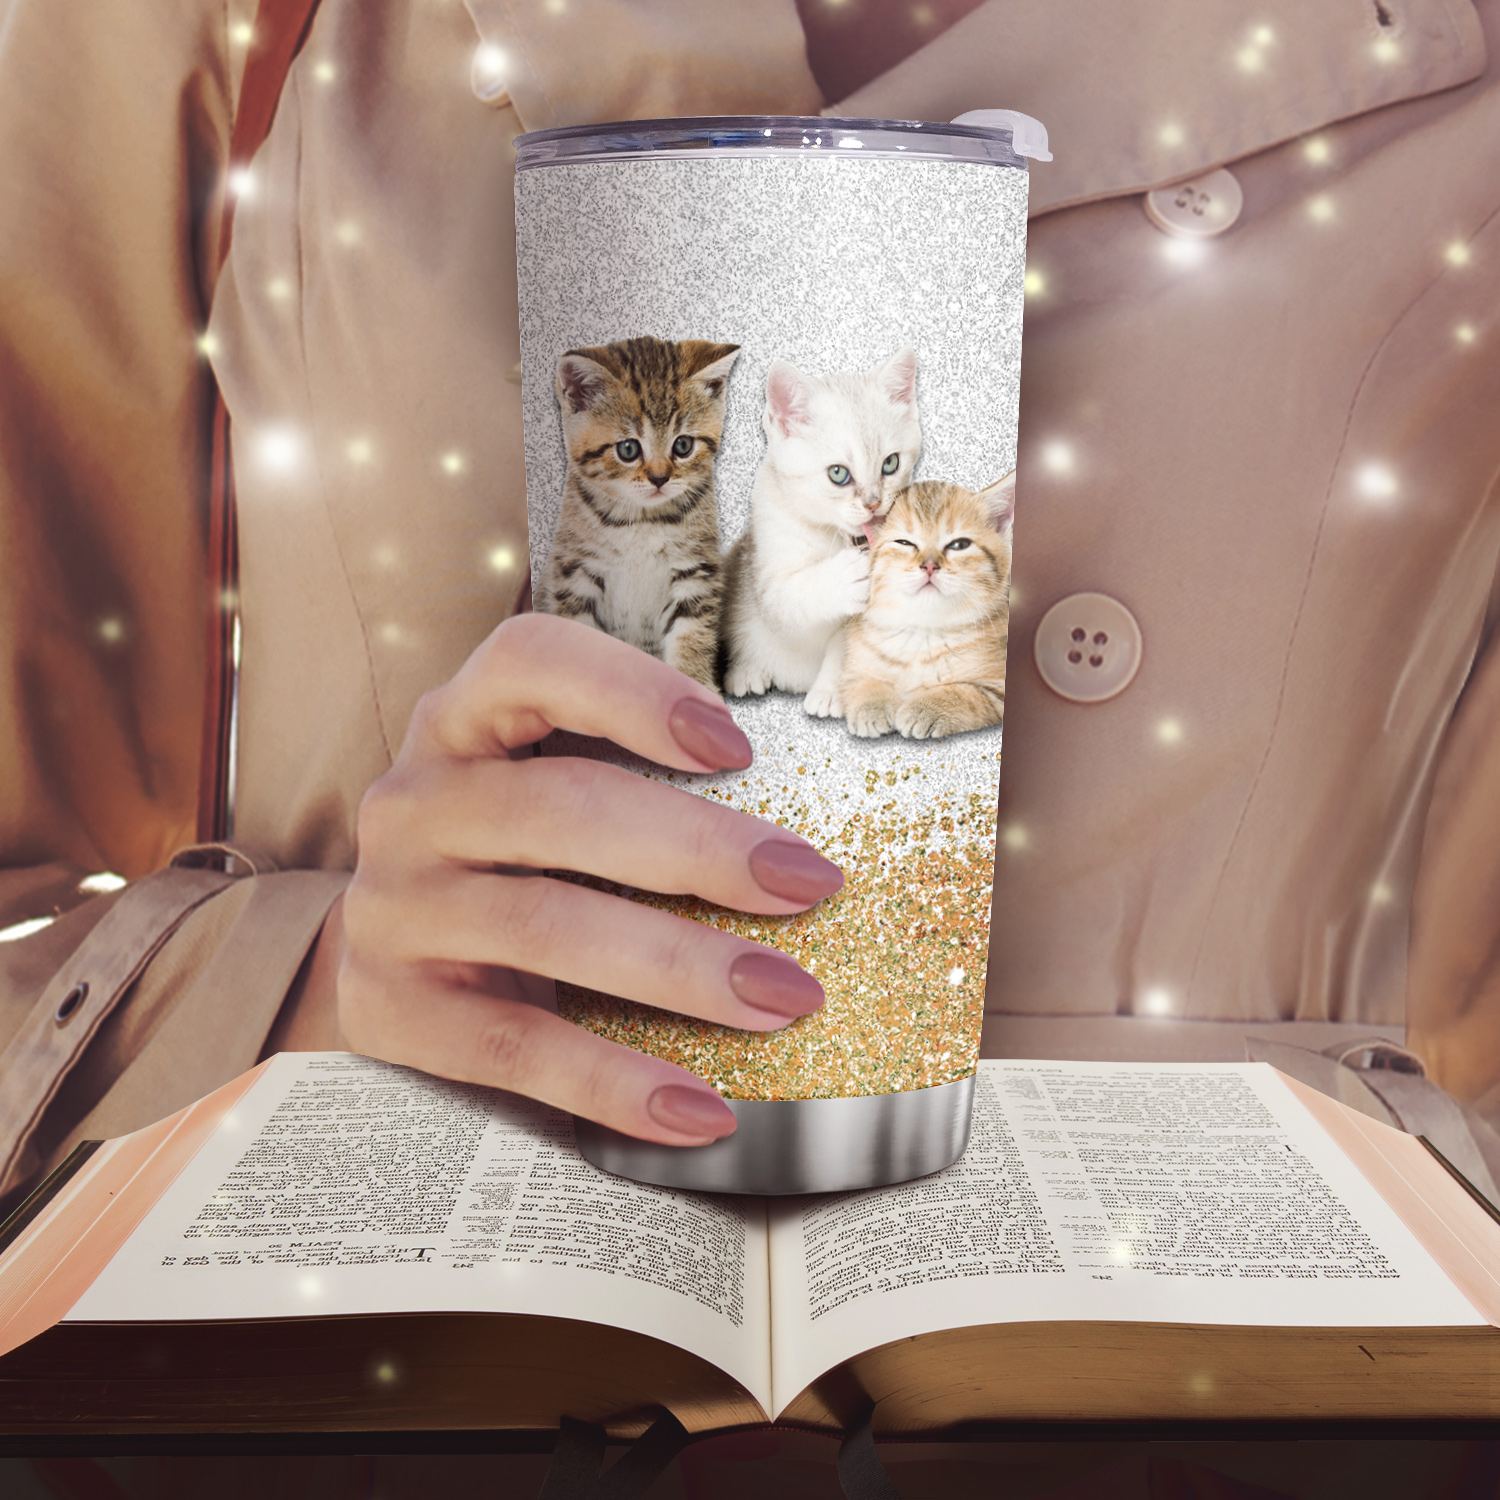 Kid Travel Tumbler with Straw Pink Cat Party Reusable Plastic Cup Drinking  Ice Coffee Mug Birthday Gift (cat pink, 420 ml)